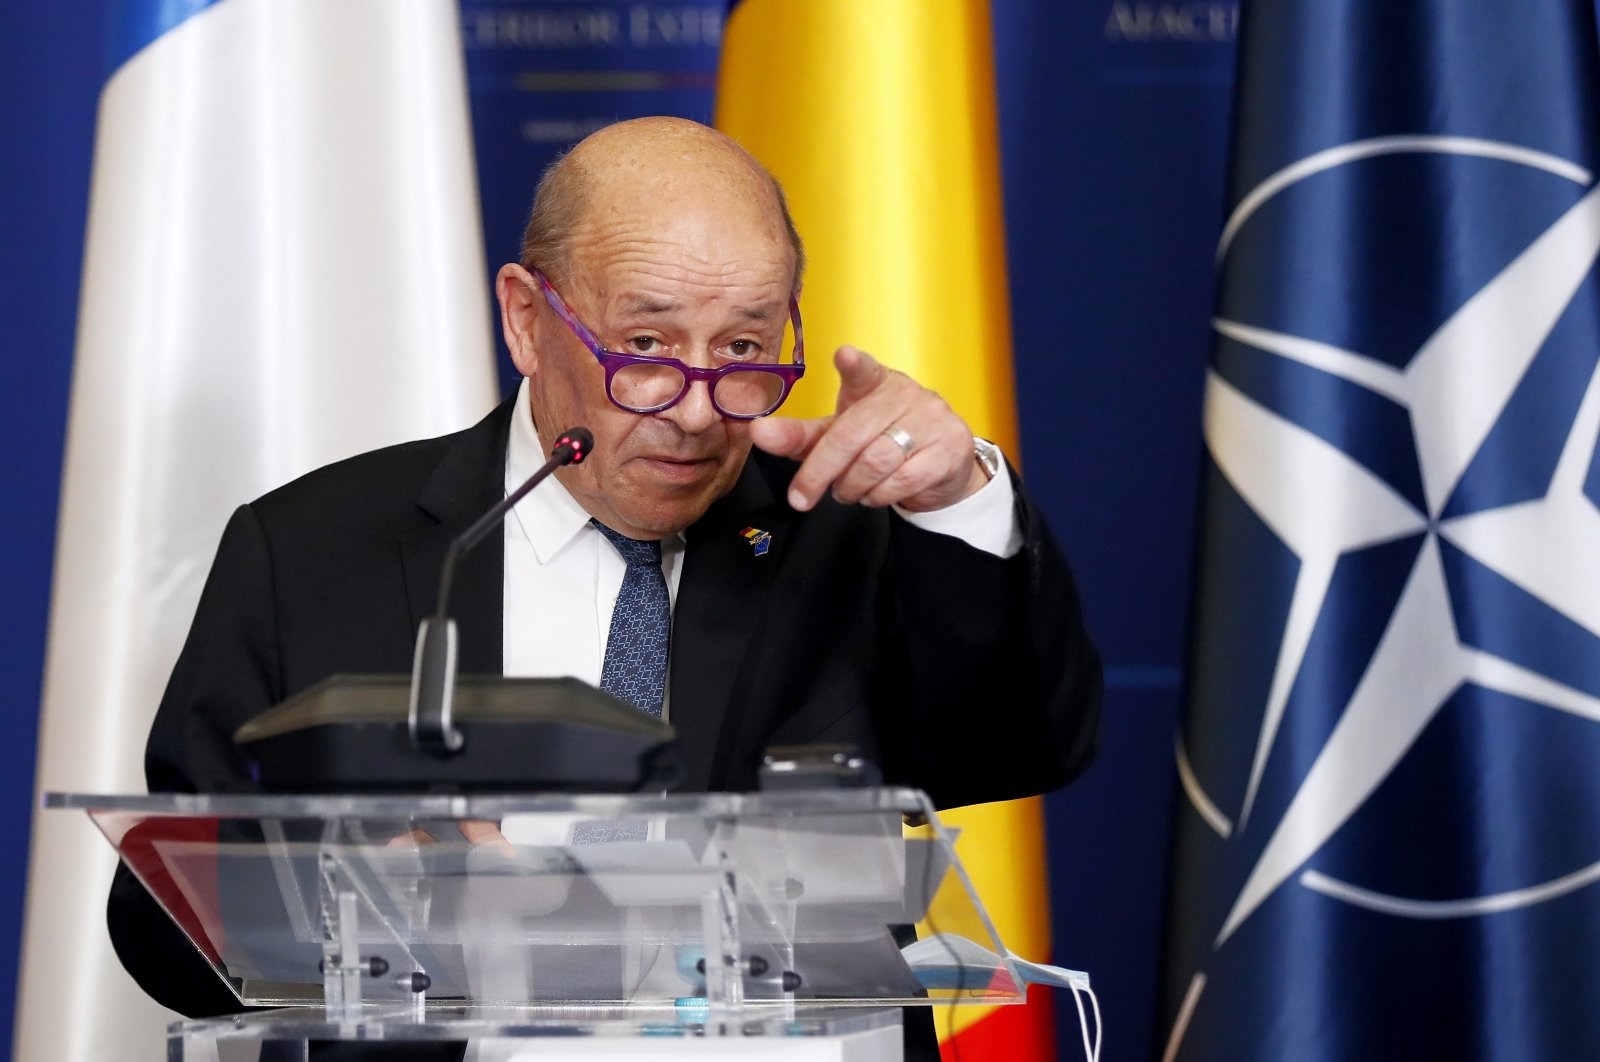 Jean-Yves Le Drian, French minister for Europe and Foreign Affairs, accompanied by the Romanian Foreign Minister, gestures before answering a journalist&#039;s question at the end of a common statement that followed their B9 meeting held at Foreign Ministry headquarters in Bucharest, Romania, Feb. 3, 2022. (EPA Photo)